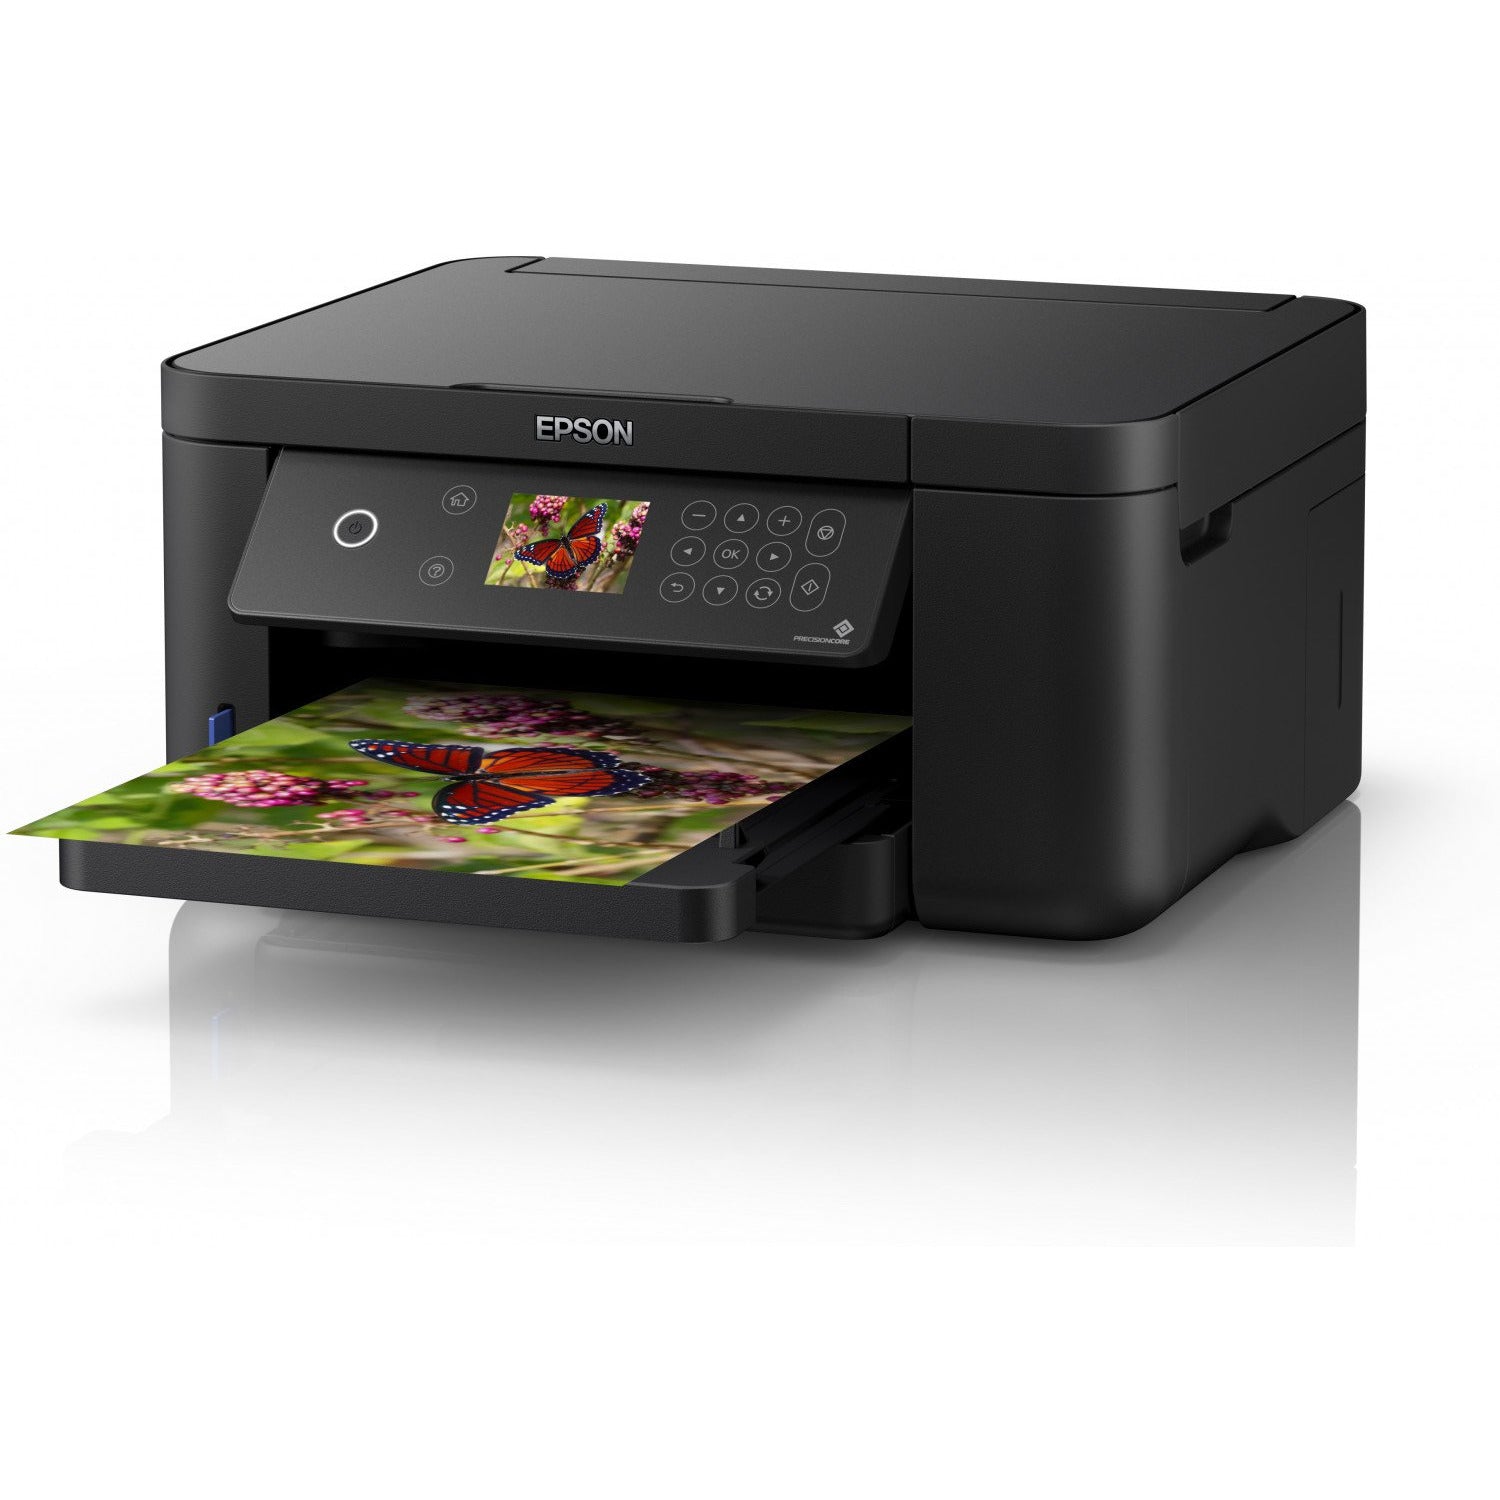 Epson XP-4200 All-in-one printer